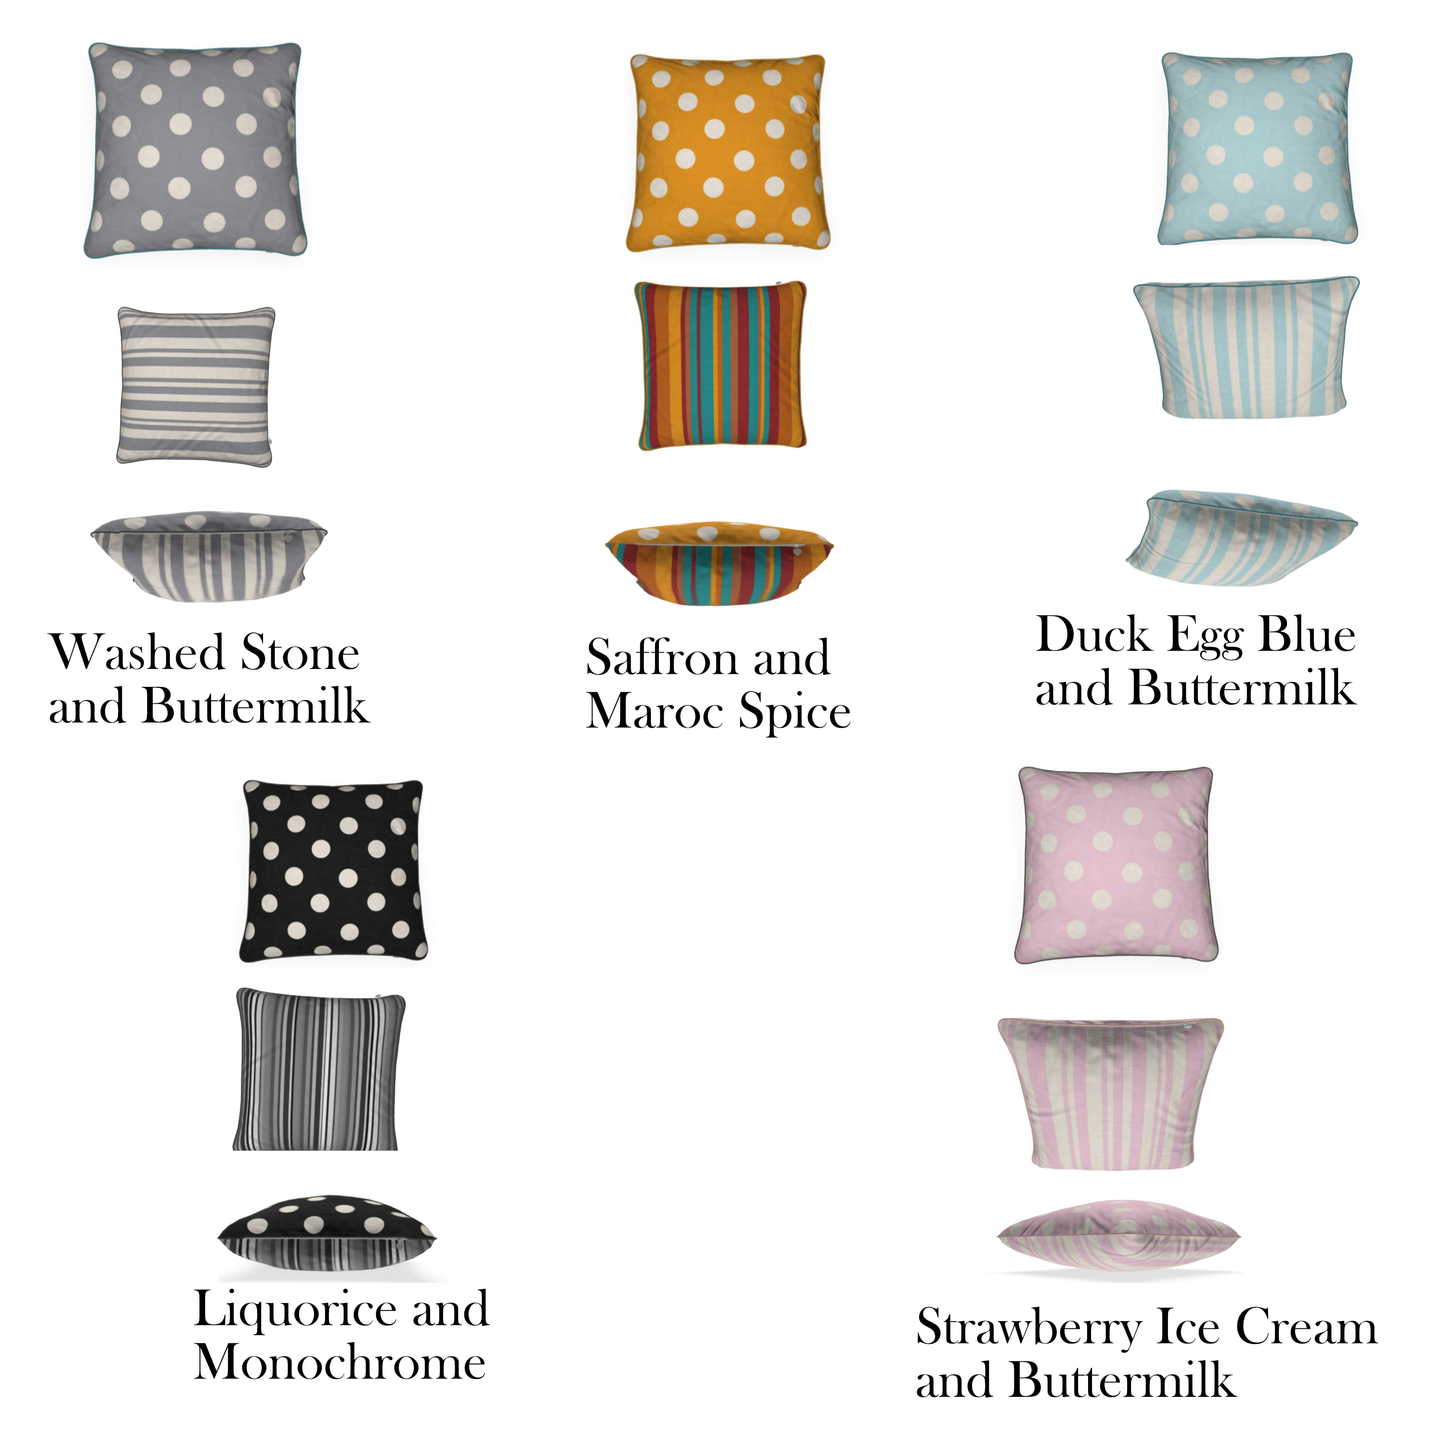 Polka Dot and Stripes Cushions and Covers in 100% Natural Cotton and Linen